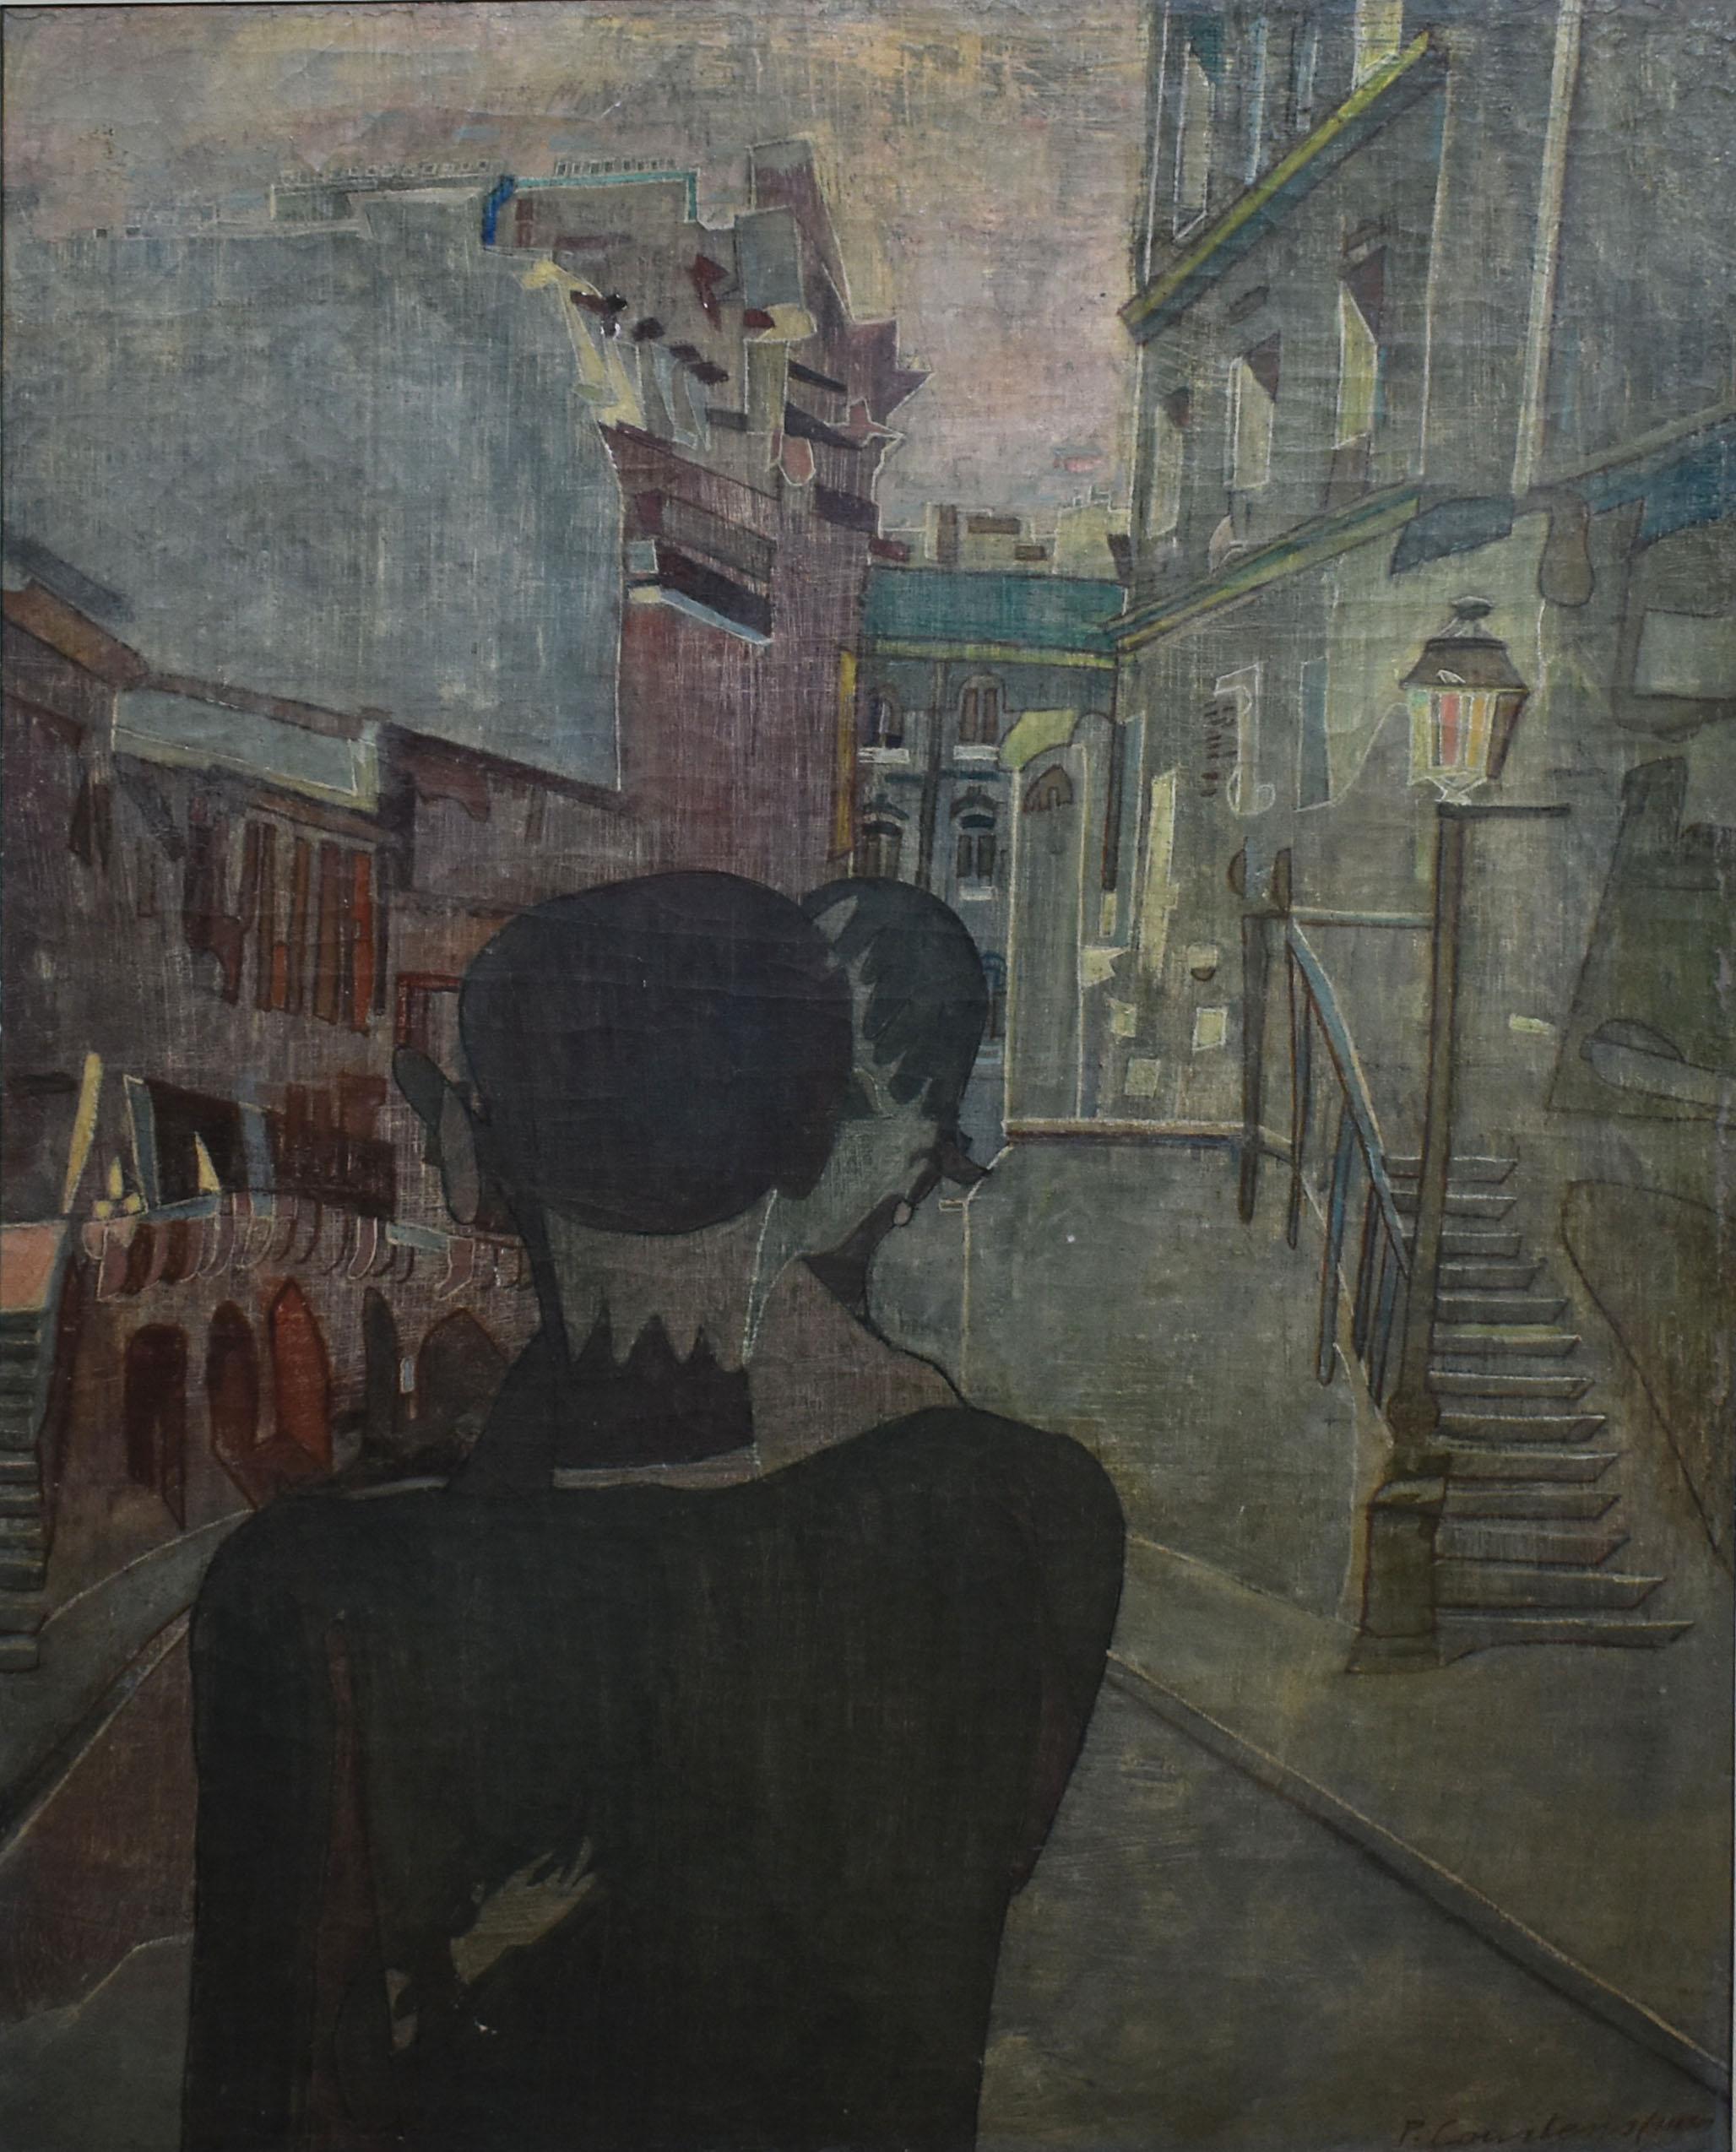 Antique modernist street scene by Pierre (Baron) Courtens  (1921 - 2004).  Oil on canvas, circa 1950.  Signed lower right.  Displayed in a modernist frame.  Image size, 23.5L x 32